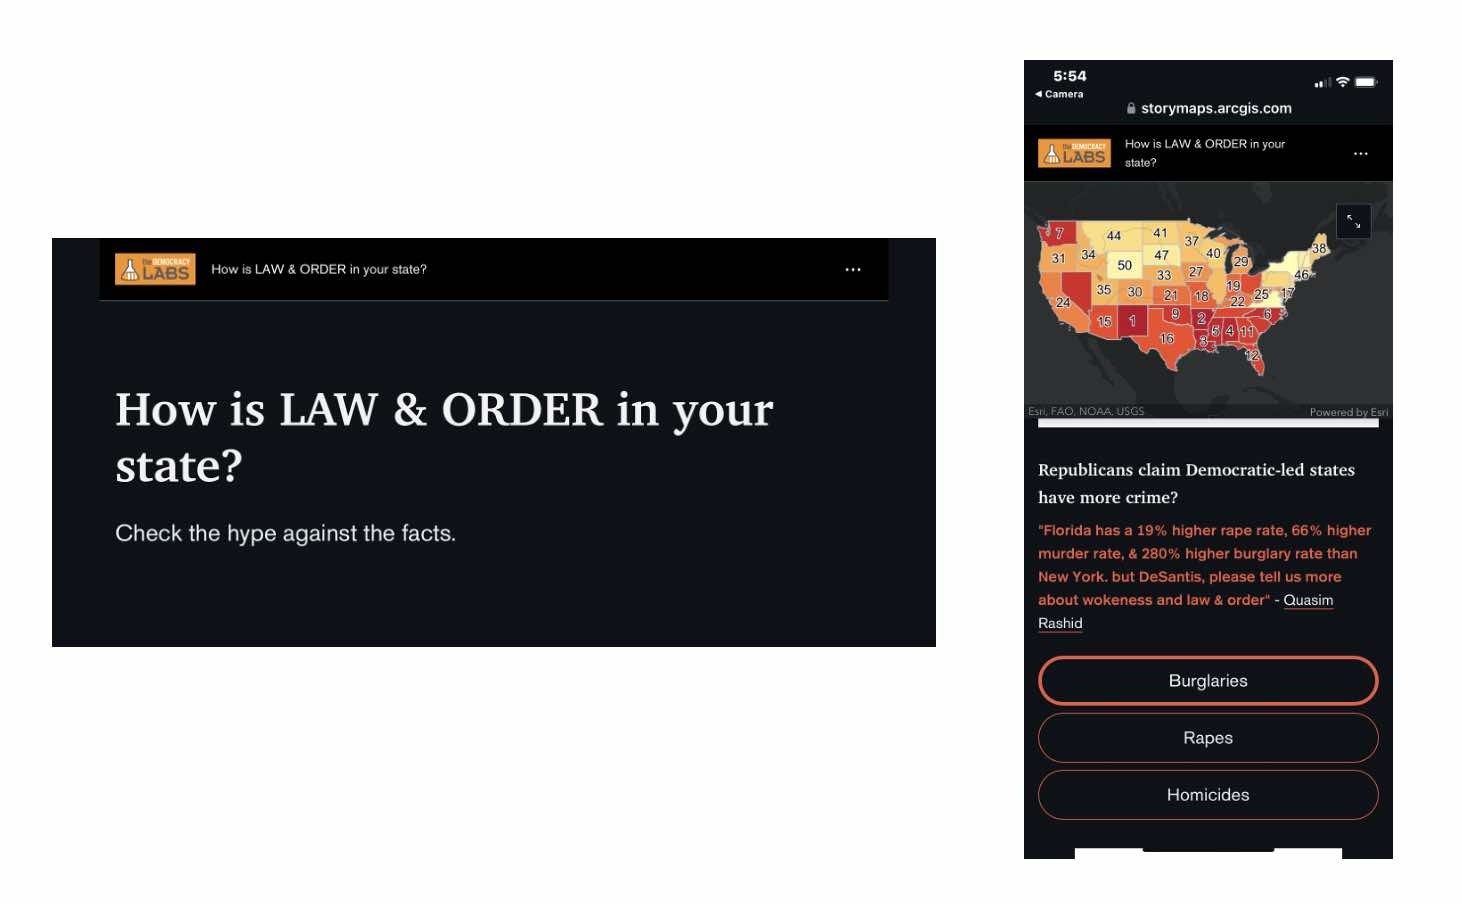 Check the law and order situation where you live with just a click.